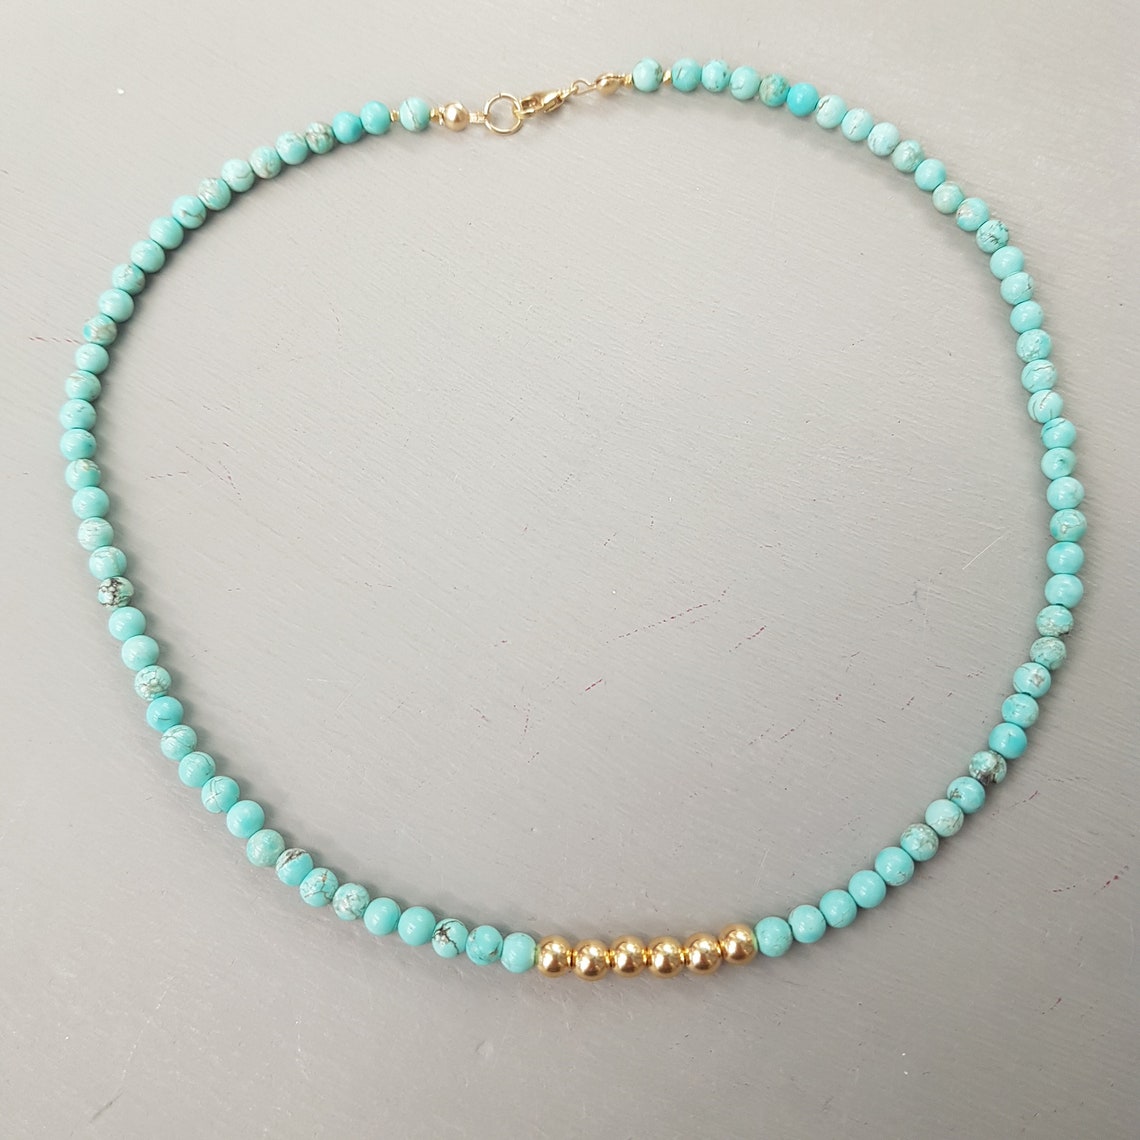 Turquoise Necklace Choker K Gold Fill Or Sterling Silver Etsy